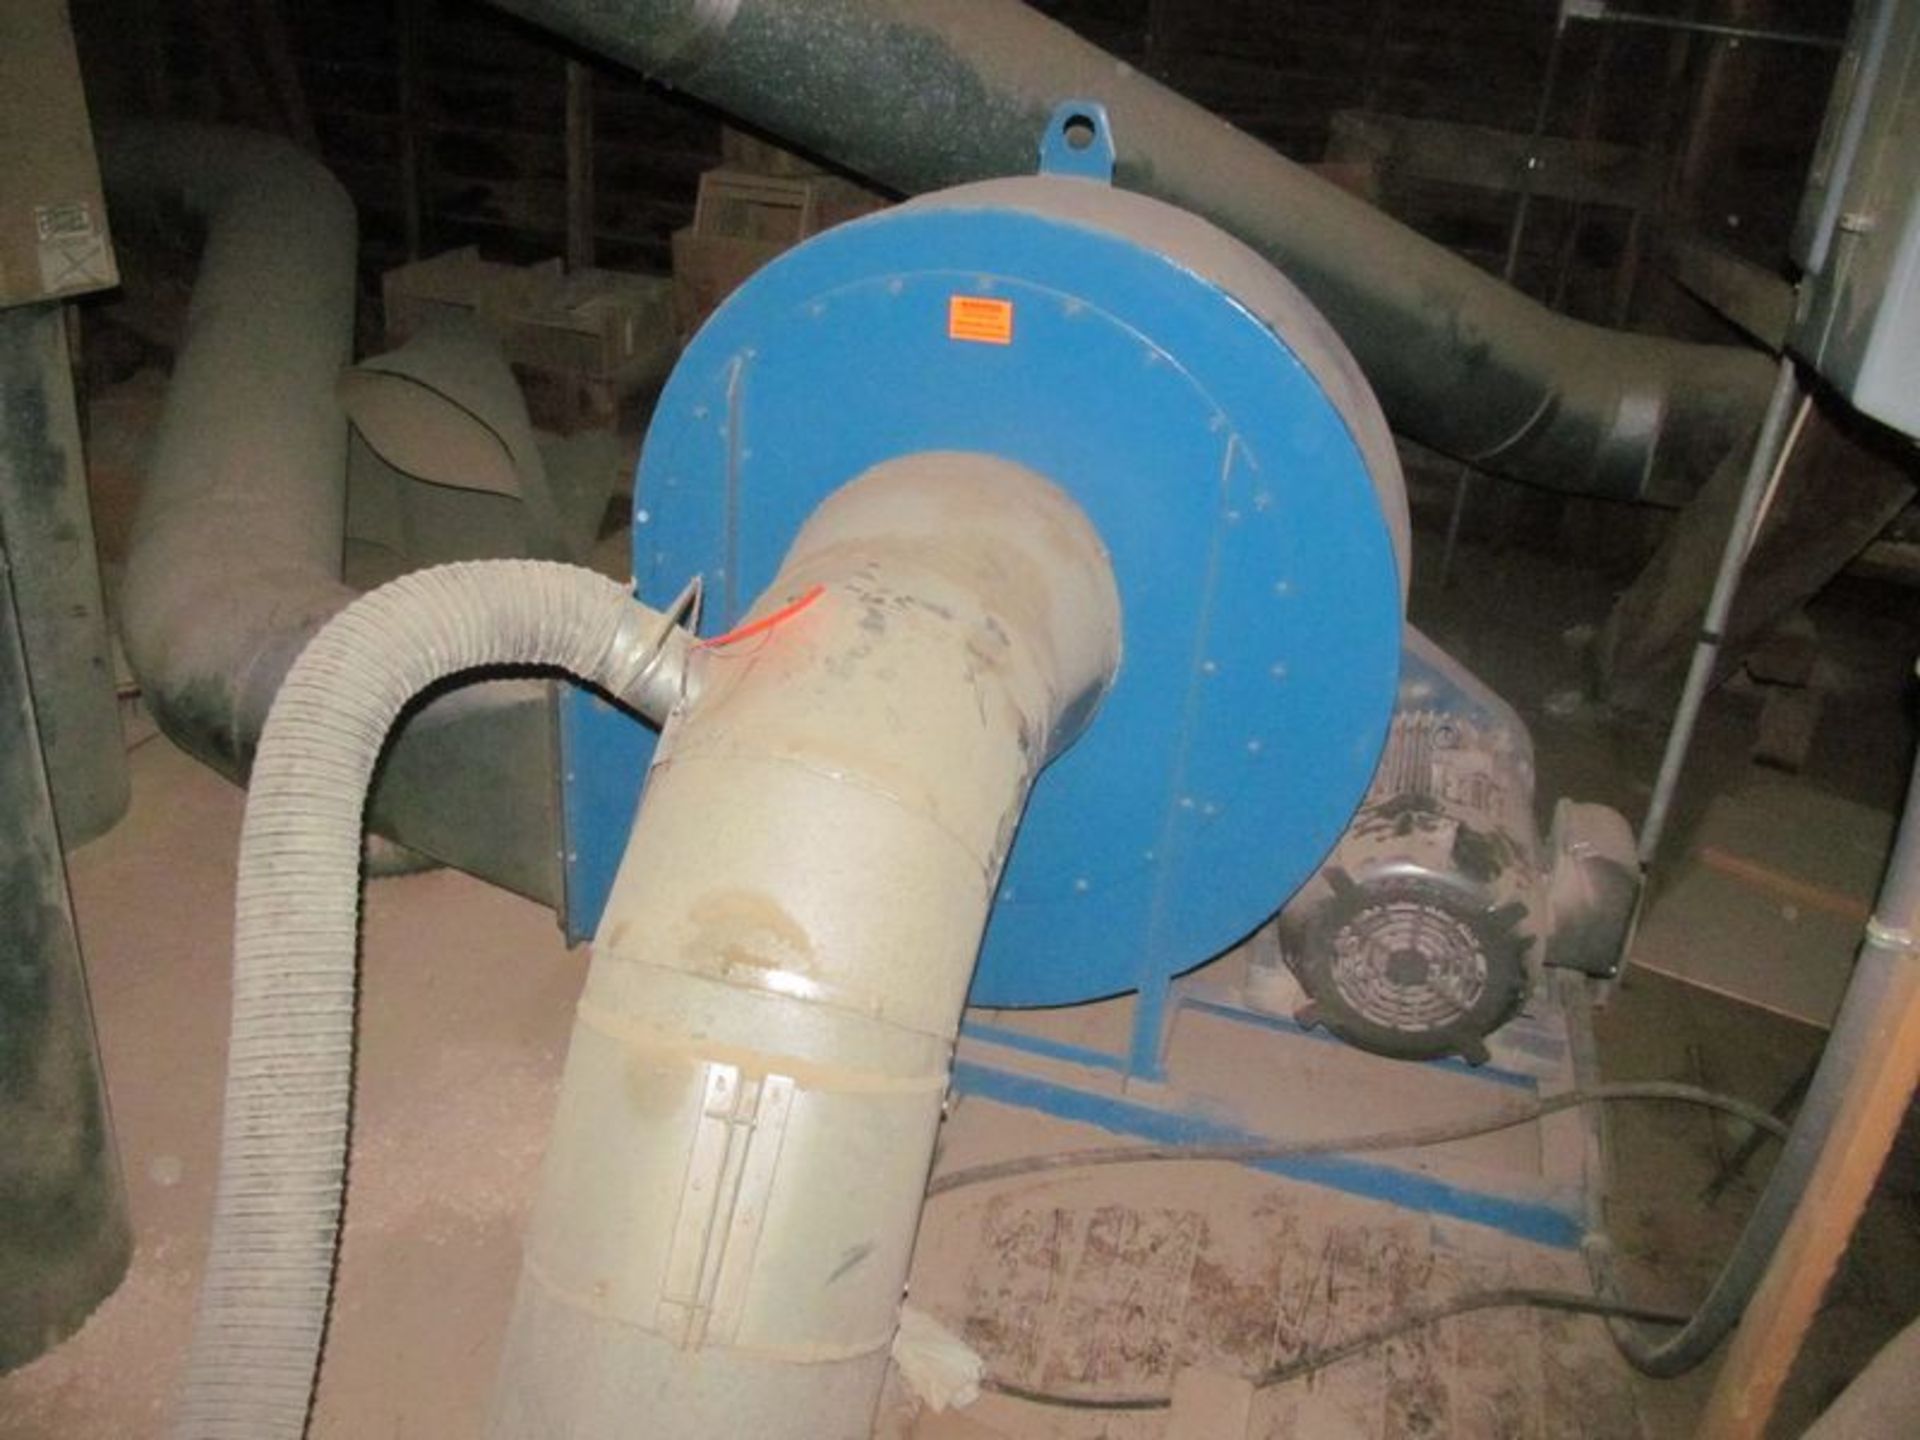 62" X 47" X 10' Collon bag house filter with 37" dia. Cyclone blower with 16" blower pipe, 15 HP